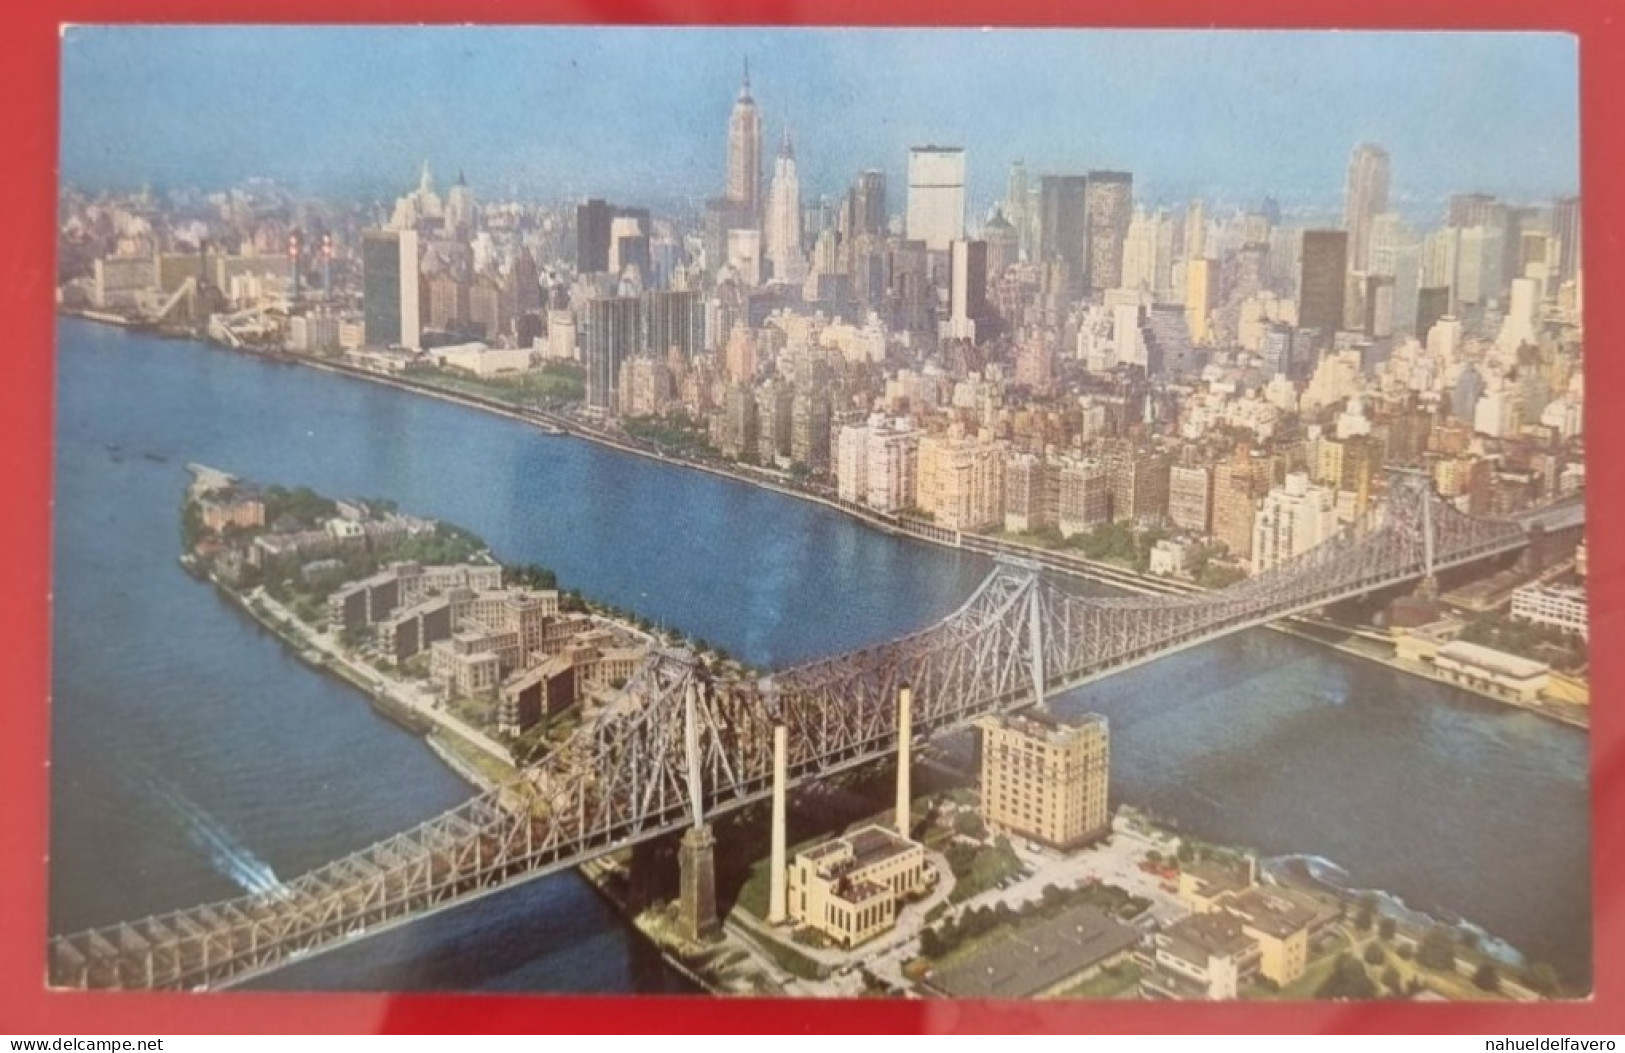 Uncirculated Postcard - USA - NY, NEW YORK CITY - AERIAL VIEW OF 59TH ST. BRIDGE - Bruggen En Tunnels